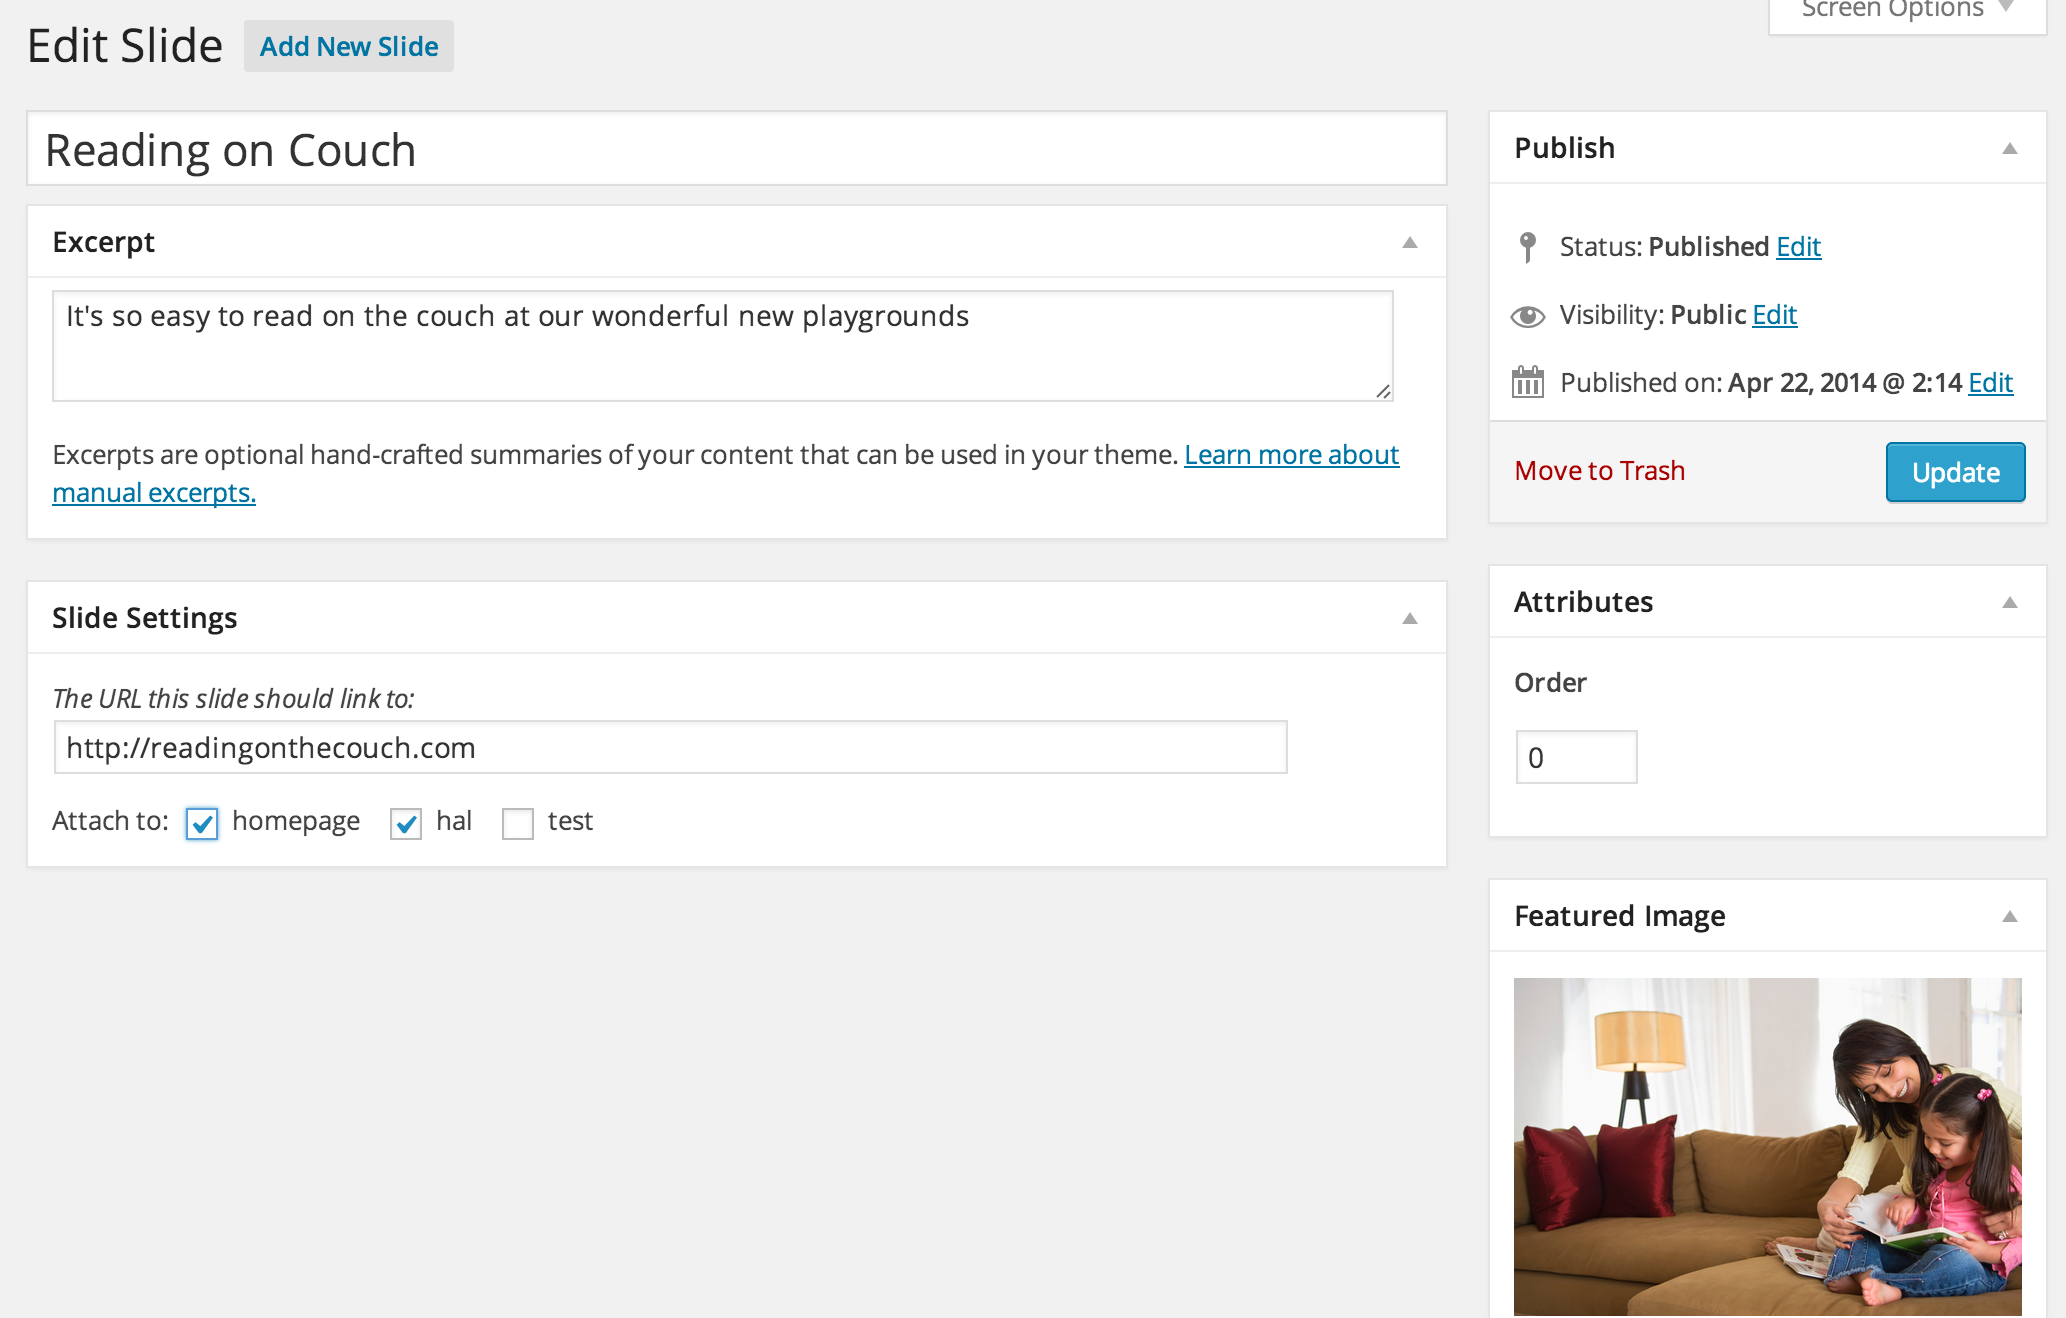 Standard WordPress UI is used including Featured Image support, Post Excerpt and Page Attributes